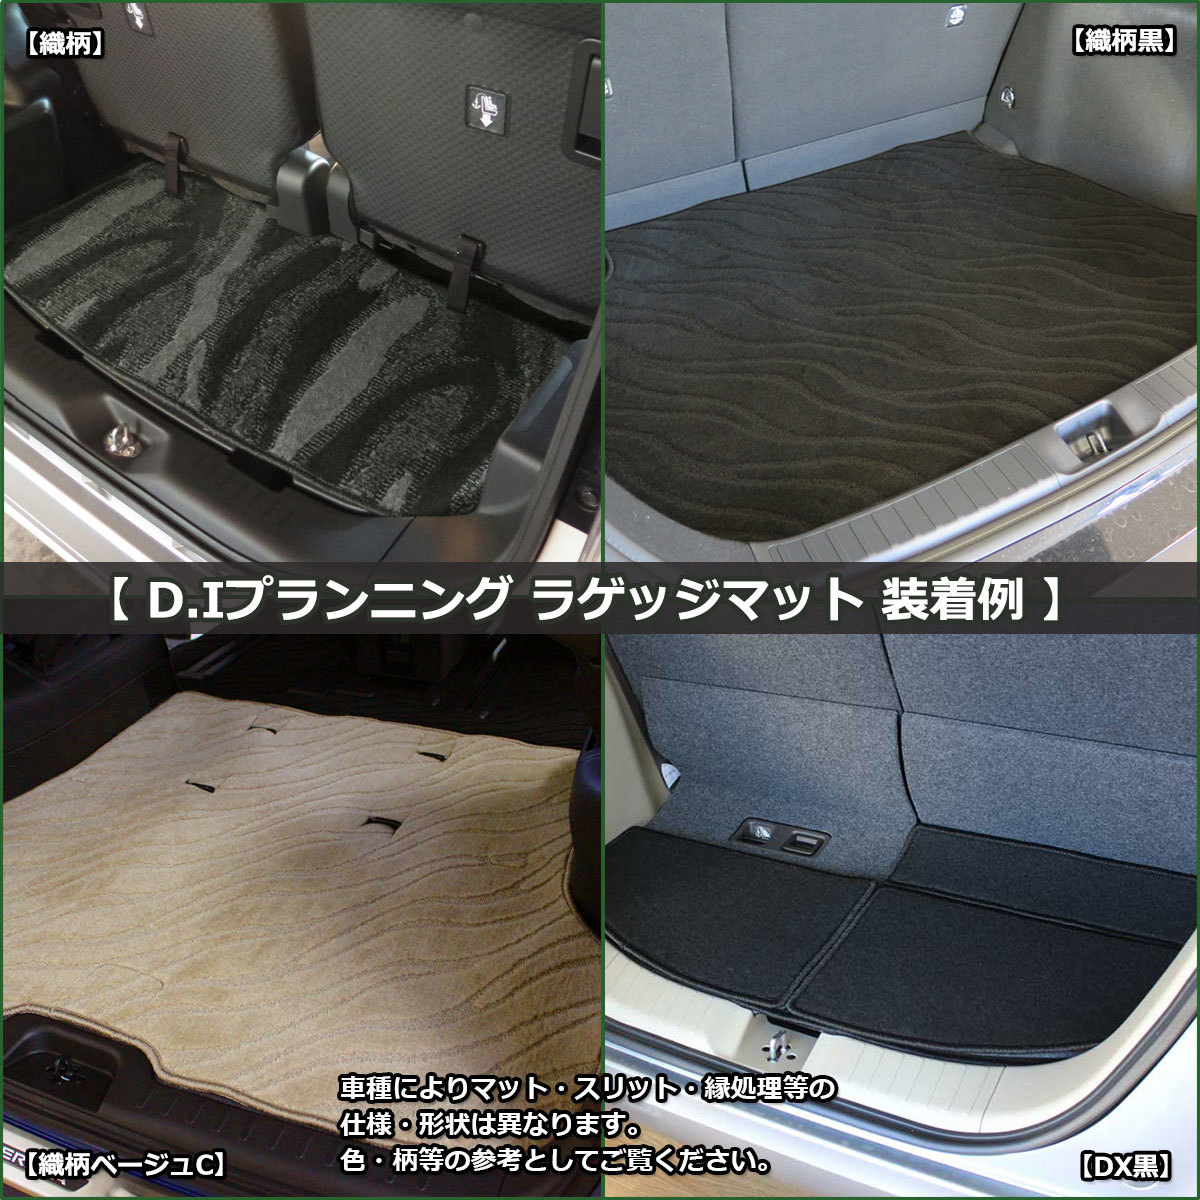 BMW 2 series G42 coupe trunk mat DX luggage cover luggage seat trunk seat car mat 220i M240i